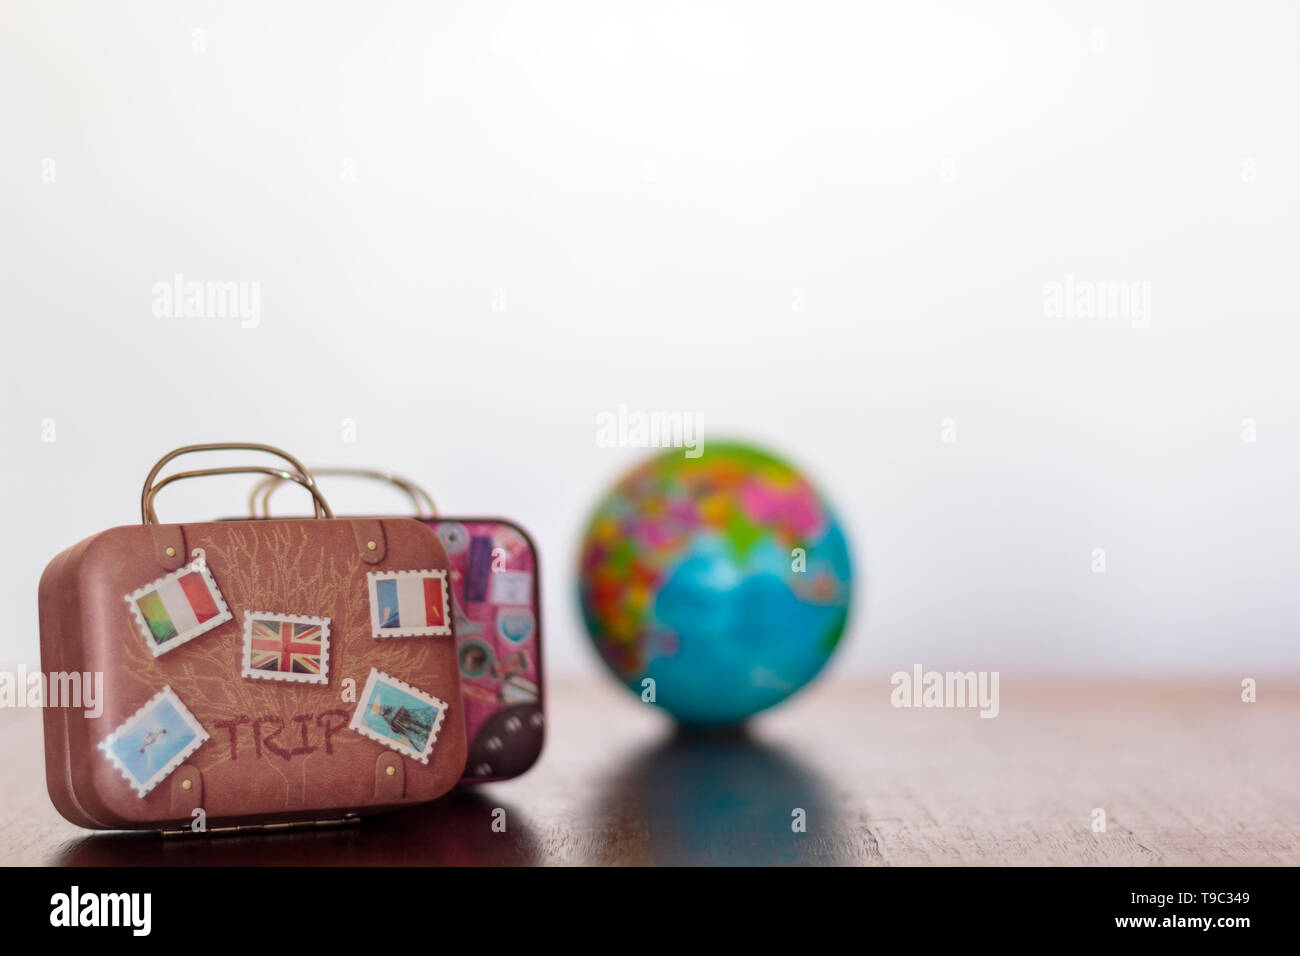 Vintage travel luggage and earth globe on a table with white background and copy space. Travel concept Stock Photo